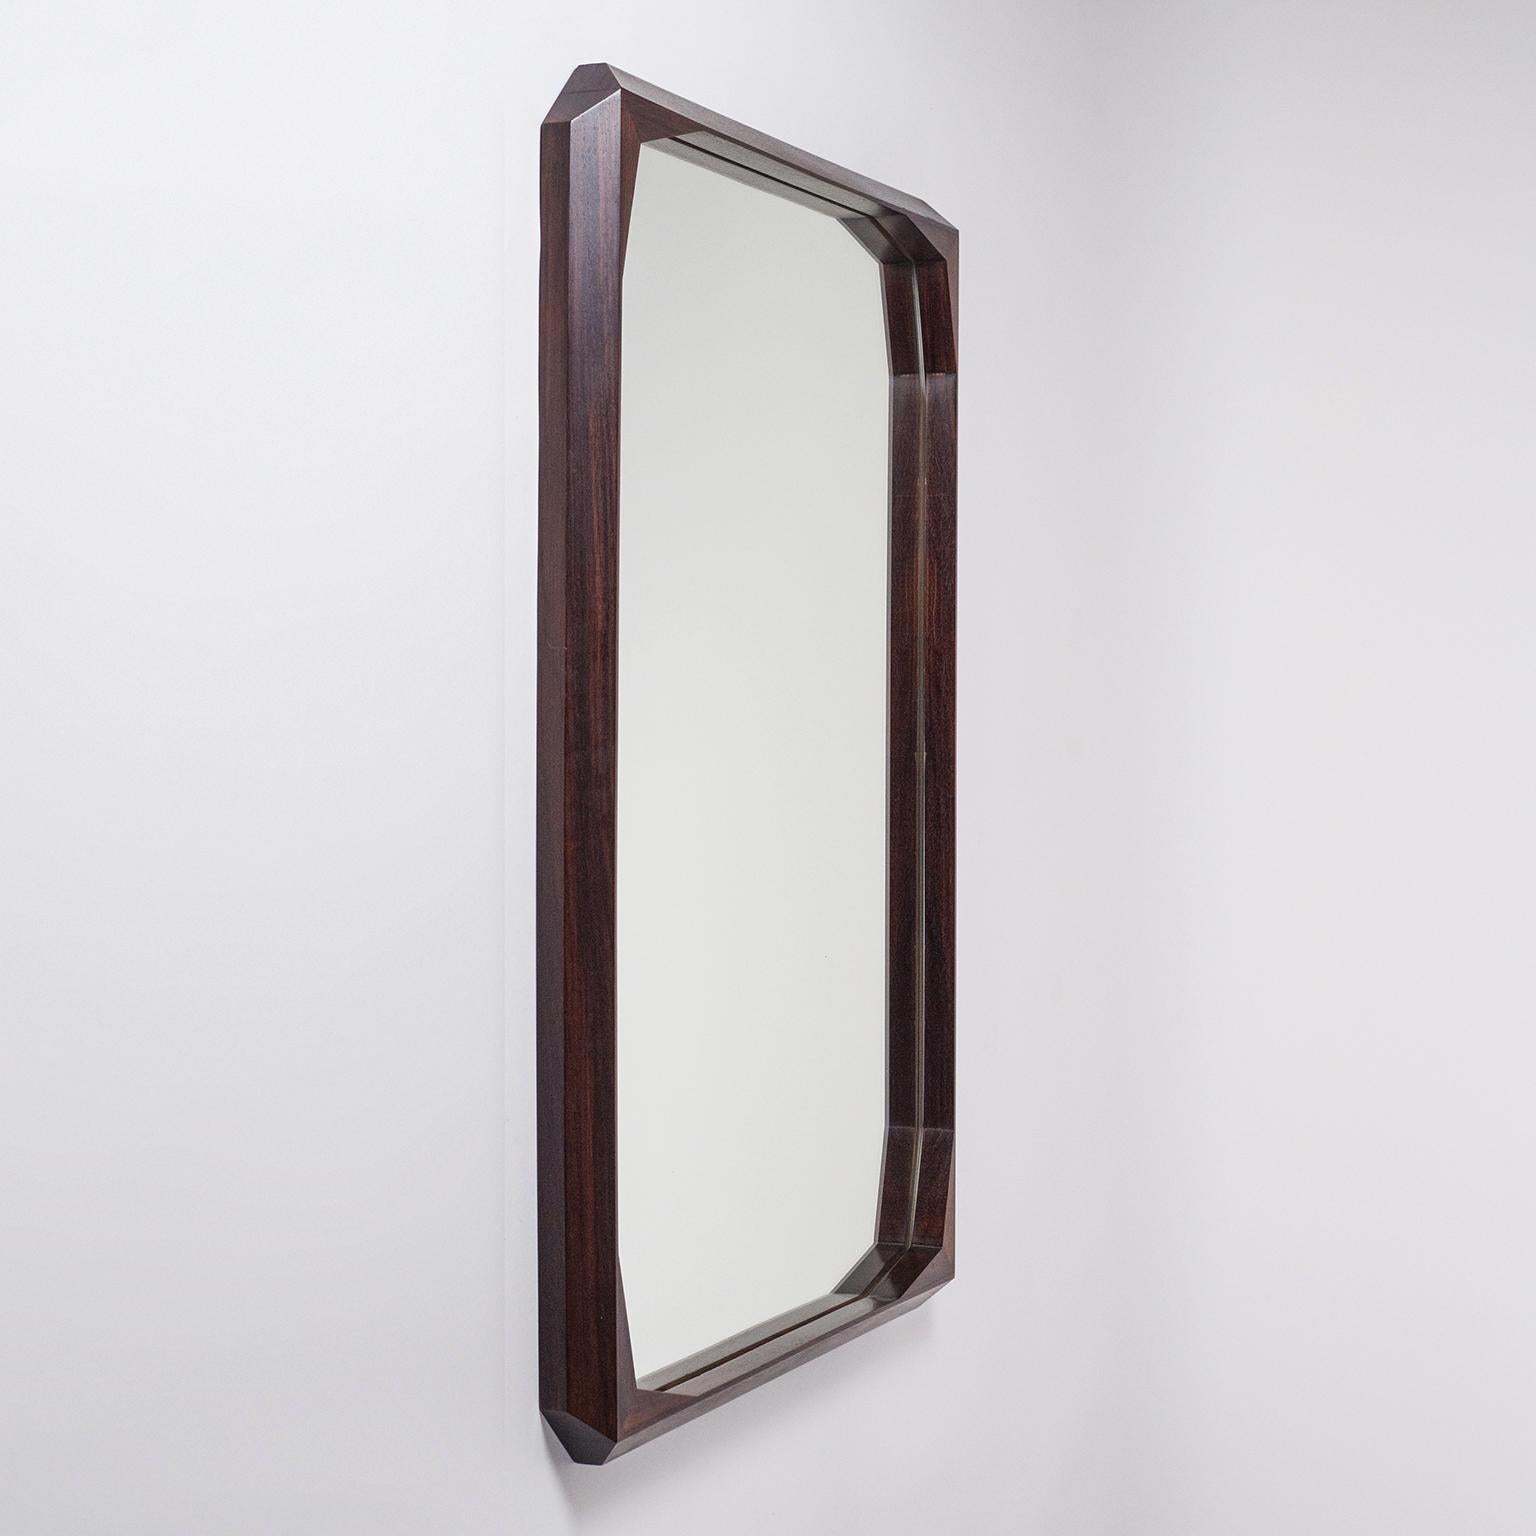 Rare Italian rosewood mirror by Dino Cavalli from the 1960s. The sculptural frame is made of solid rosewood and carved at various angles giving it a 'facetted' appearance. Very good original condition with just a few specks on the original mirror.